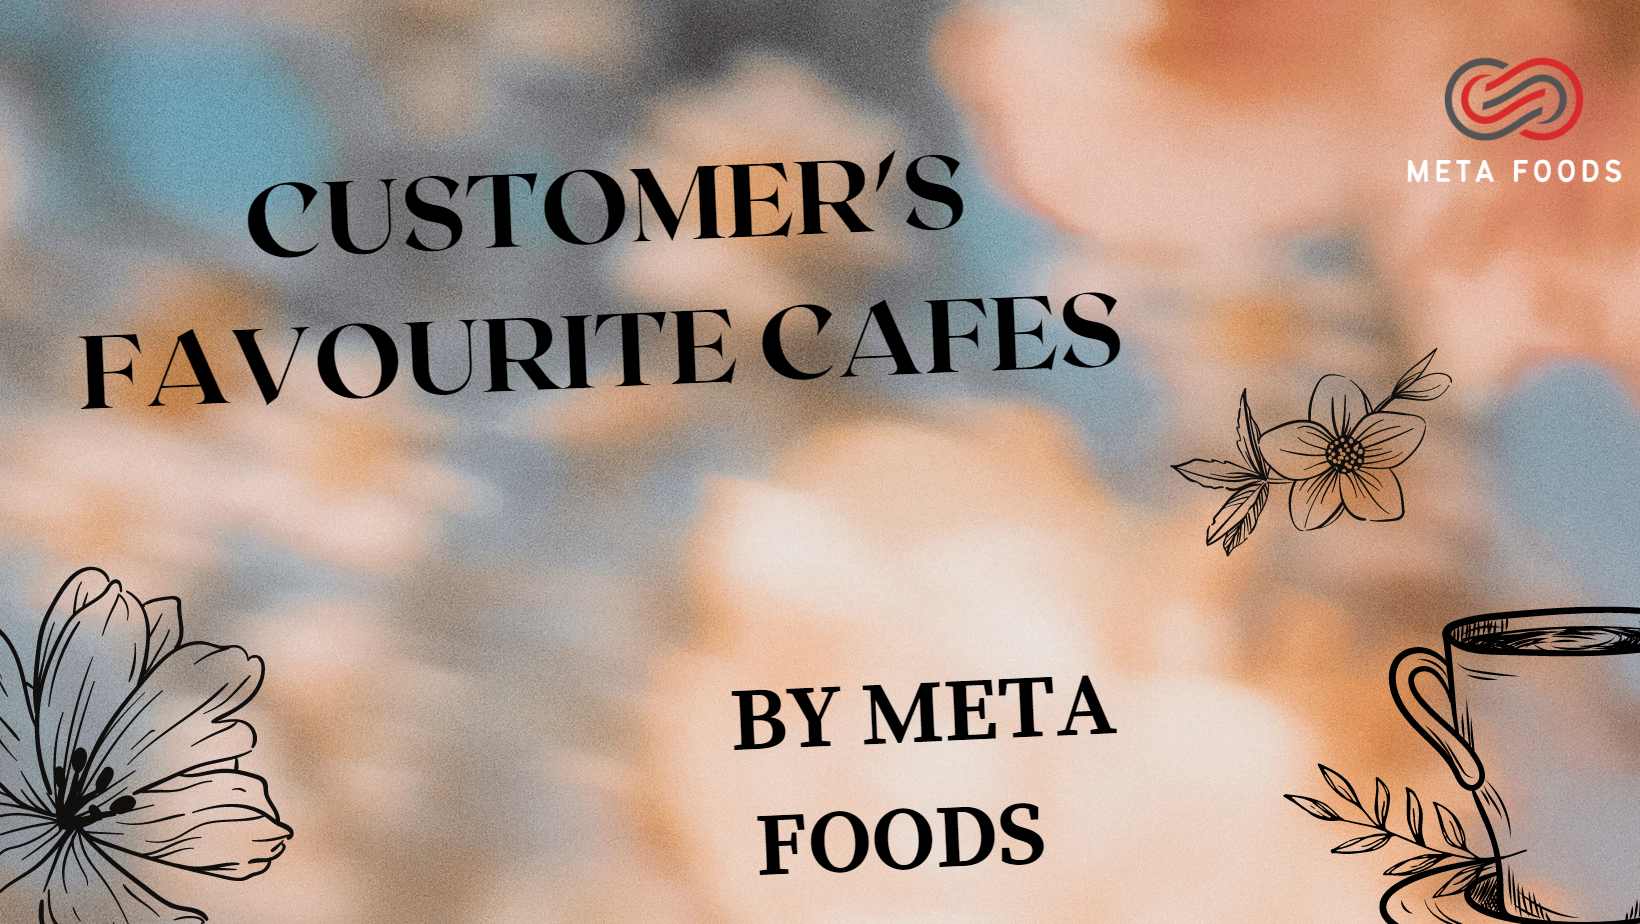 You are currently viewing top customer favourite cafe of meta foods